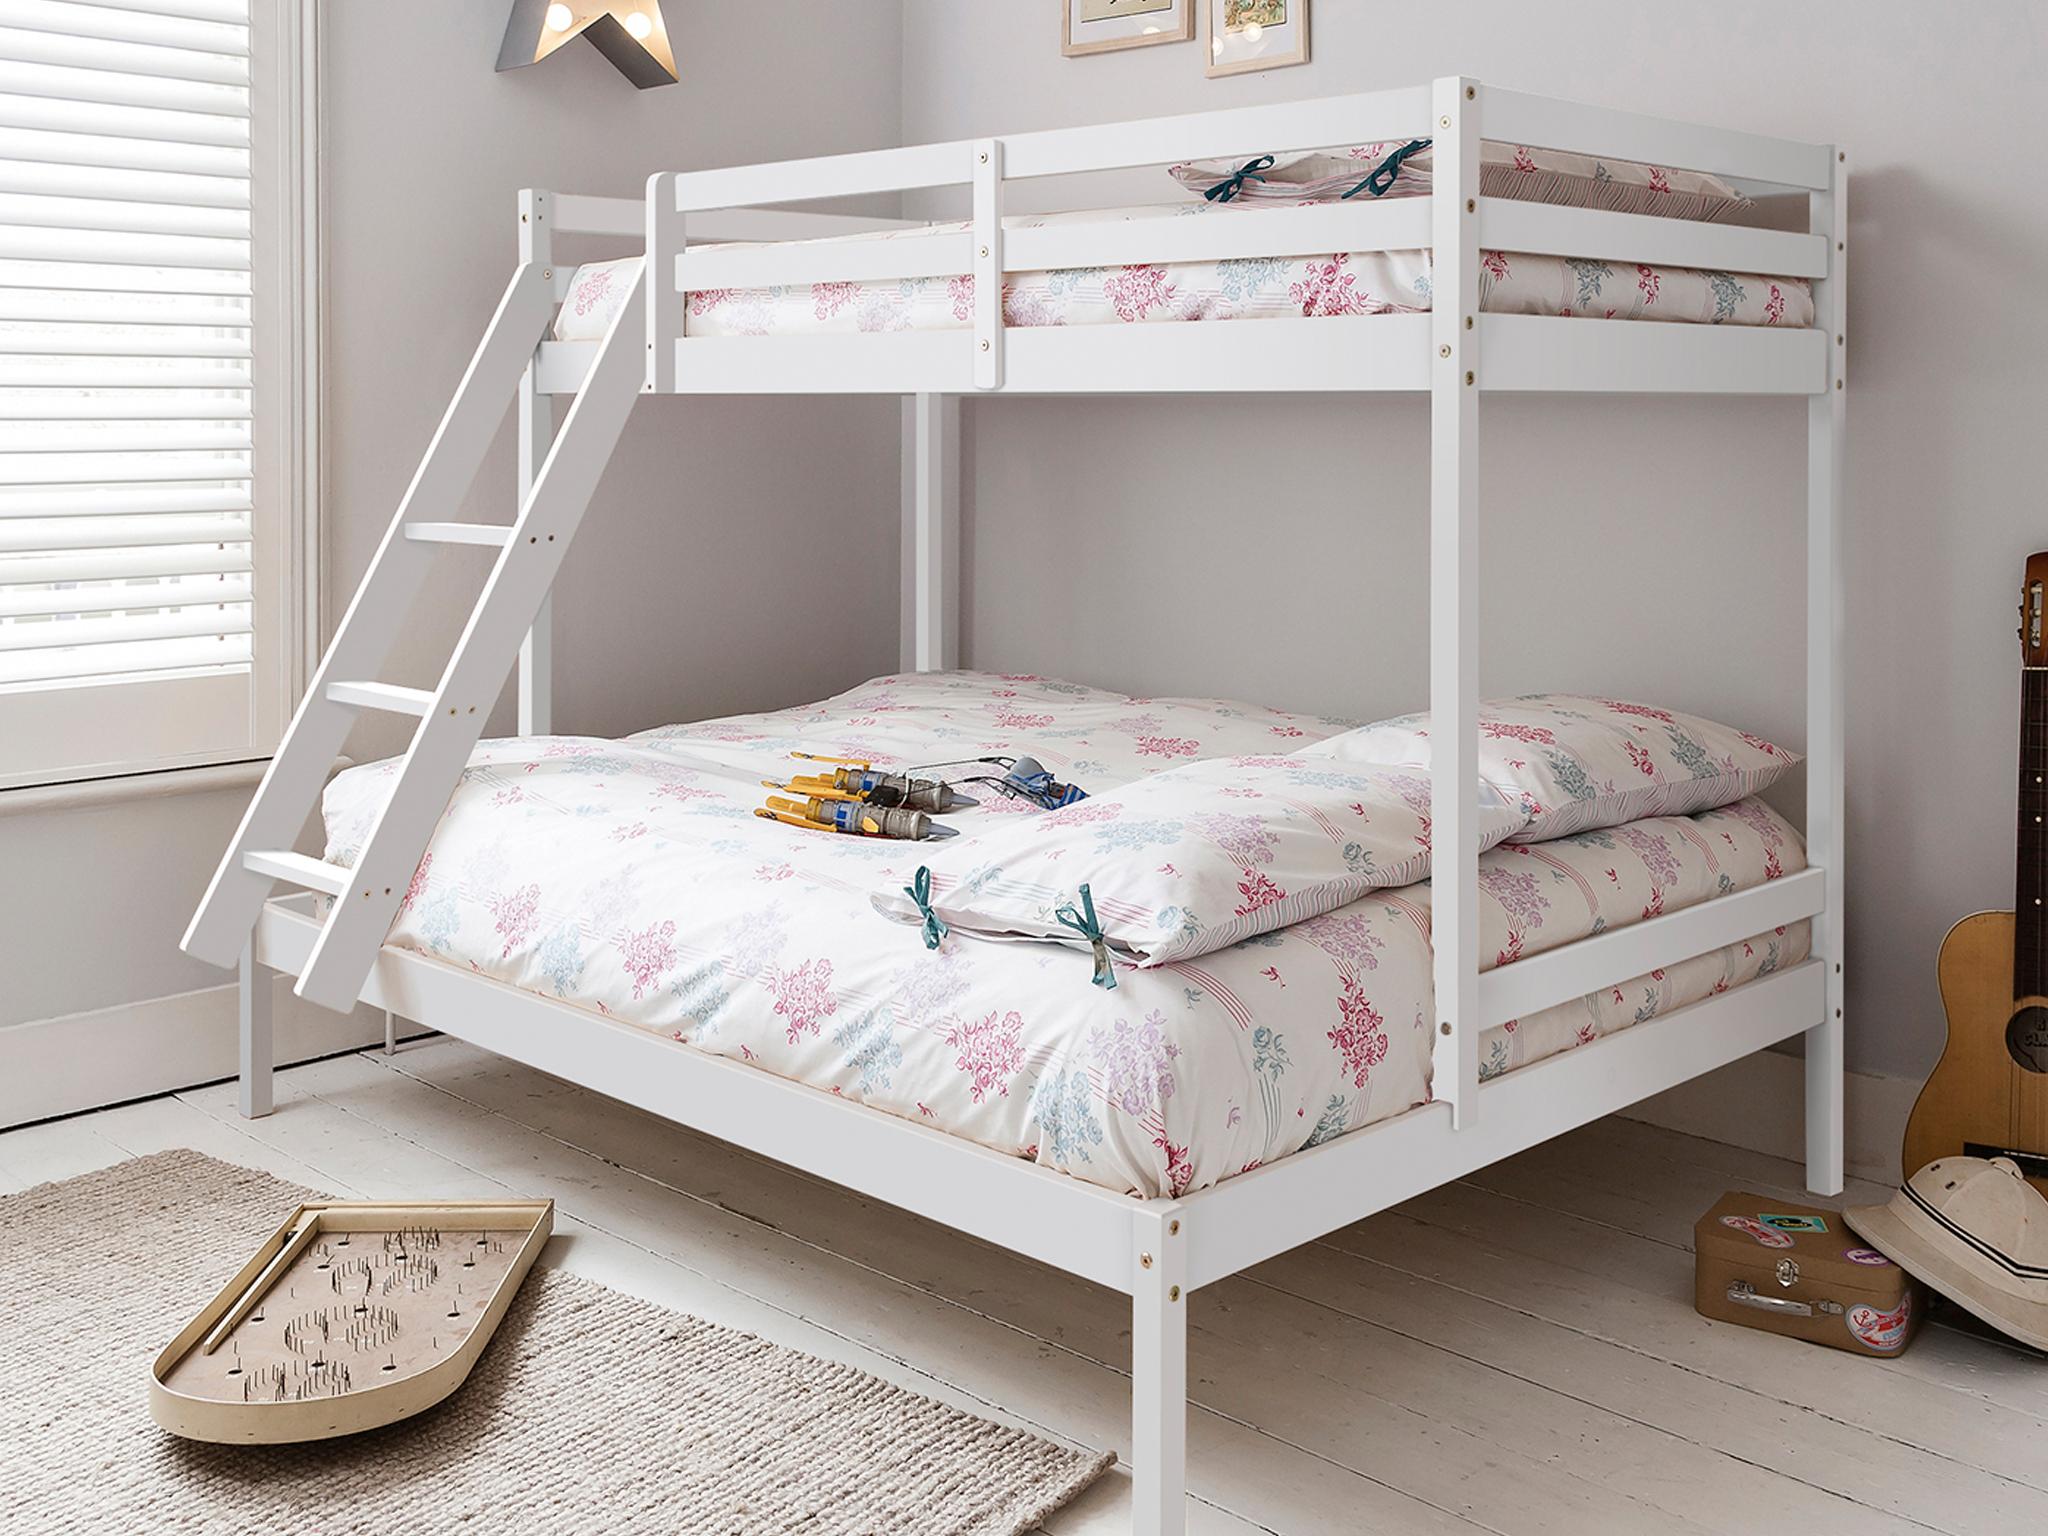 single bunk beds for sale